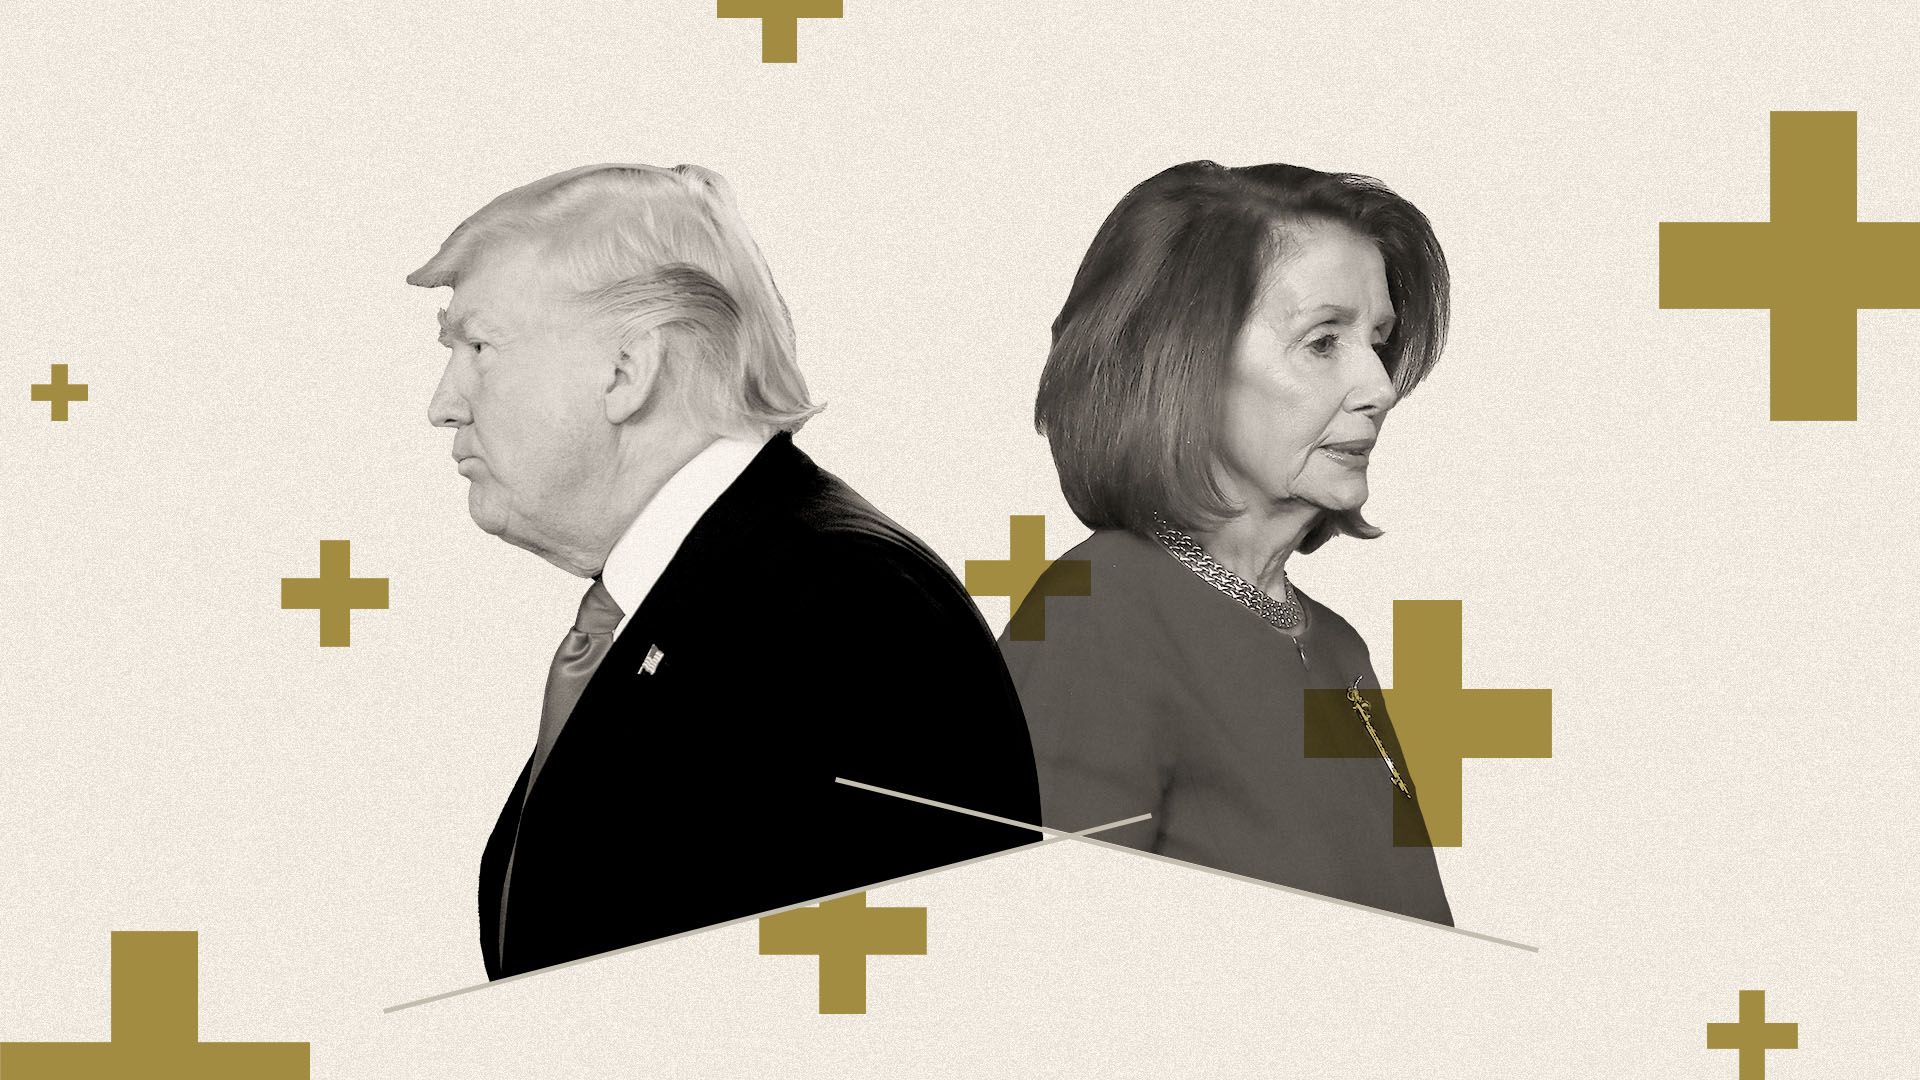 Photo illustration of President Trump and Speaker Pelosi both in profile looking in opposite directions